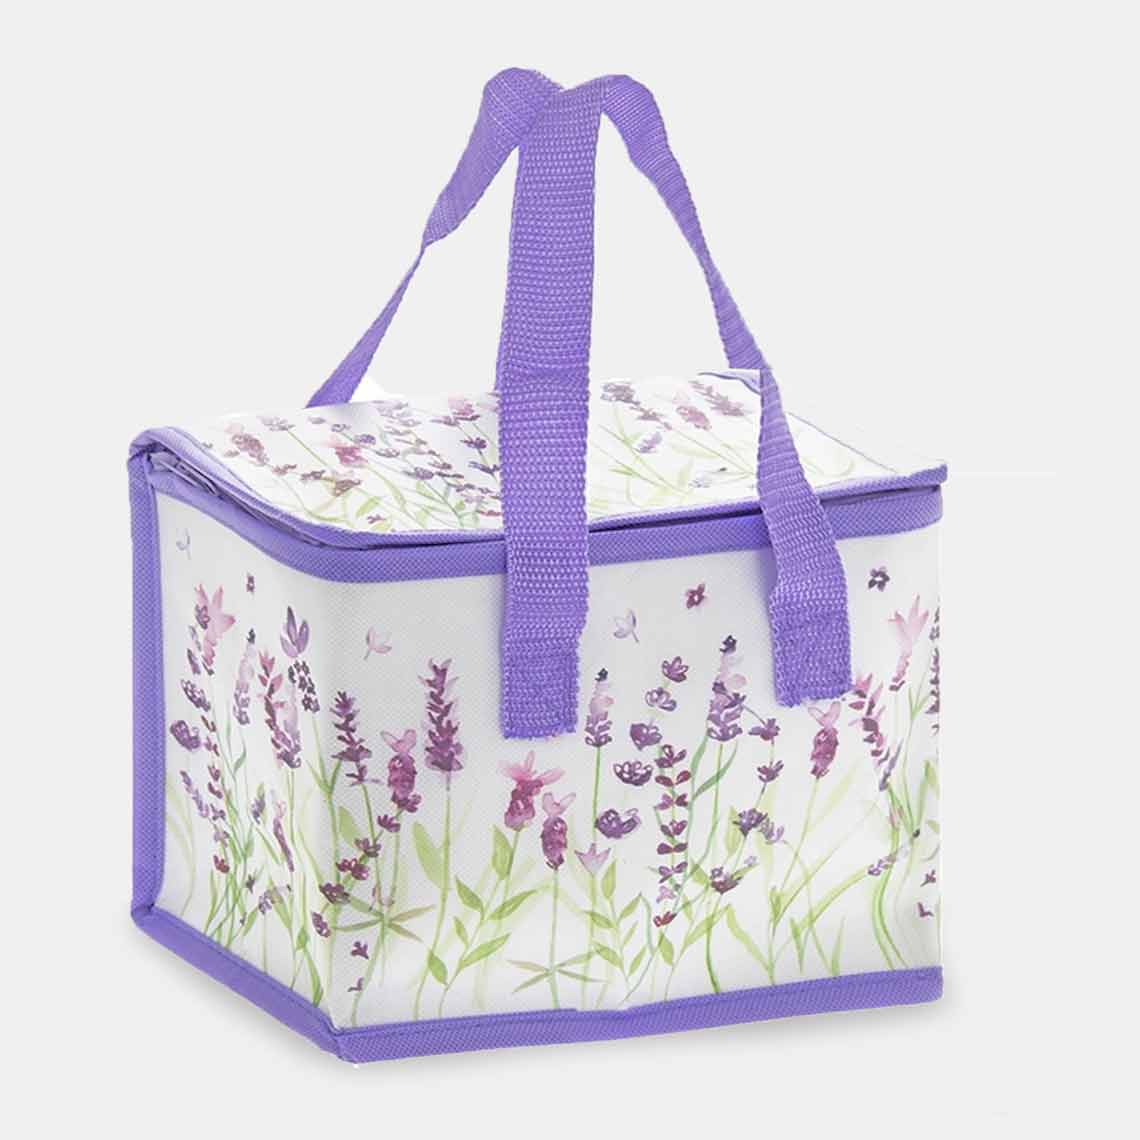 Eco Friendly Lavender Feild Cool Bag, Lunch Bag, Picnic Carry Bags - Insulated lunch bag by Fashion Accessories